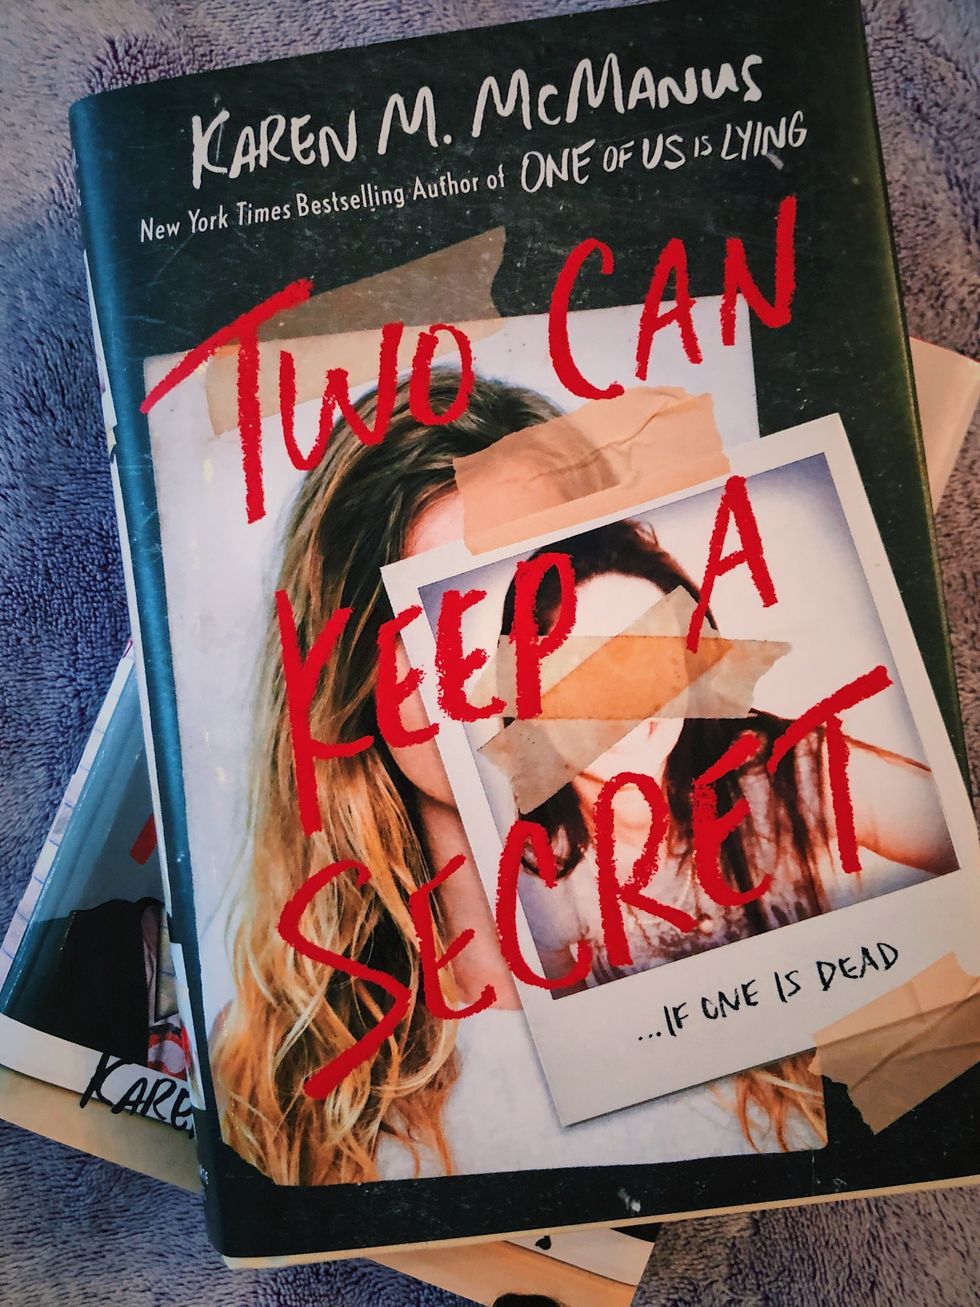 book review on two can keep a secret